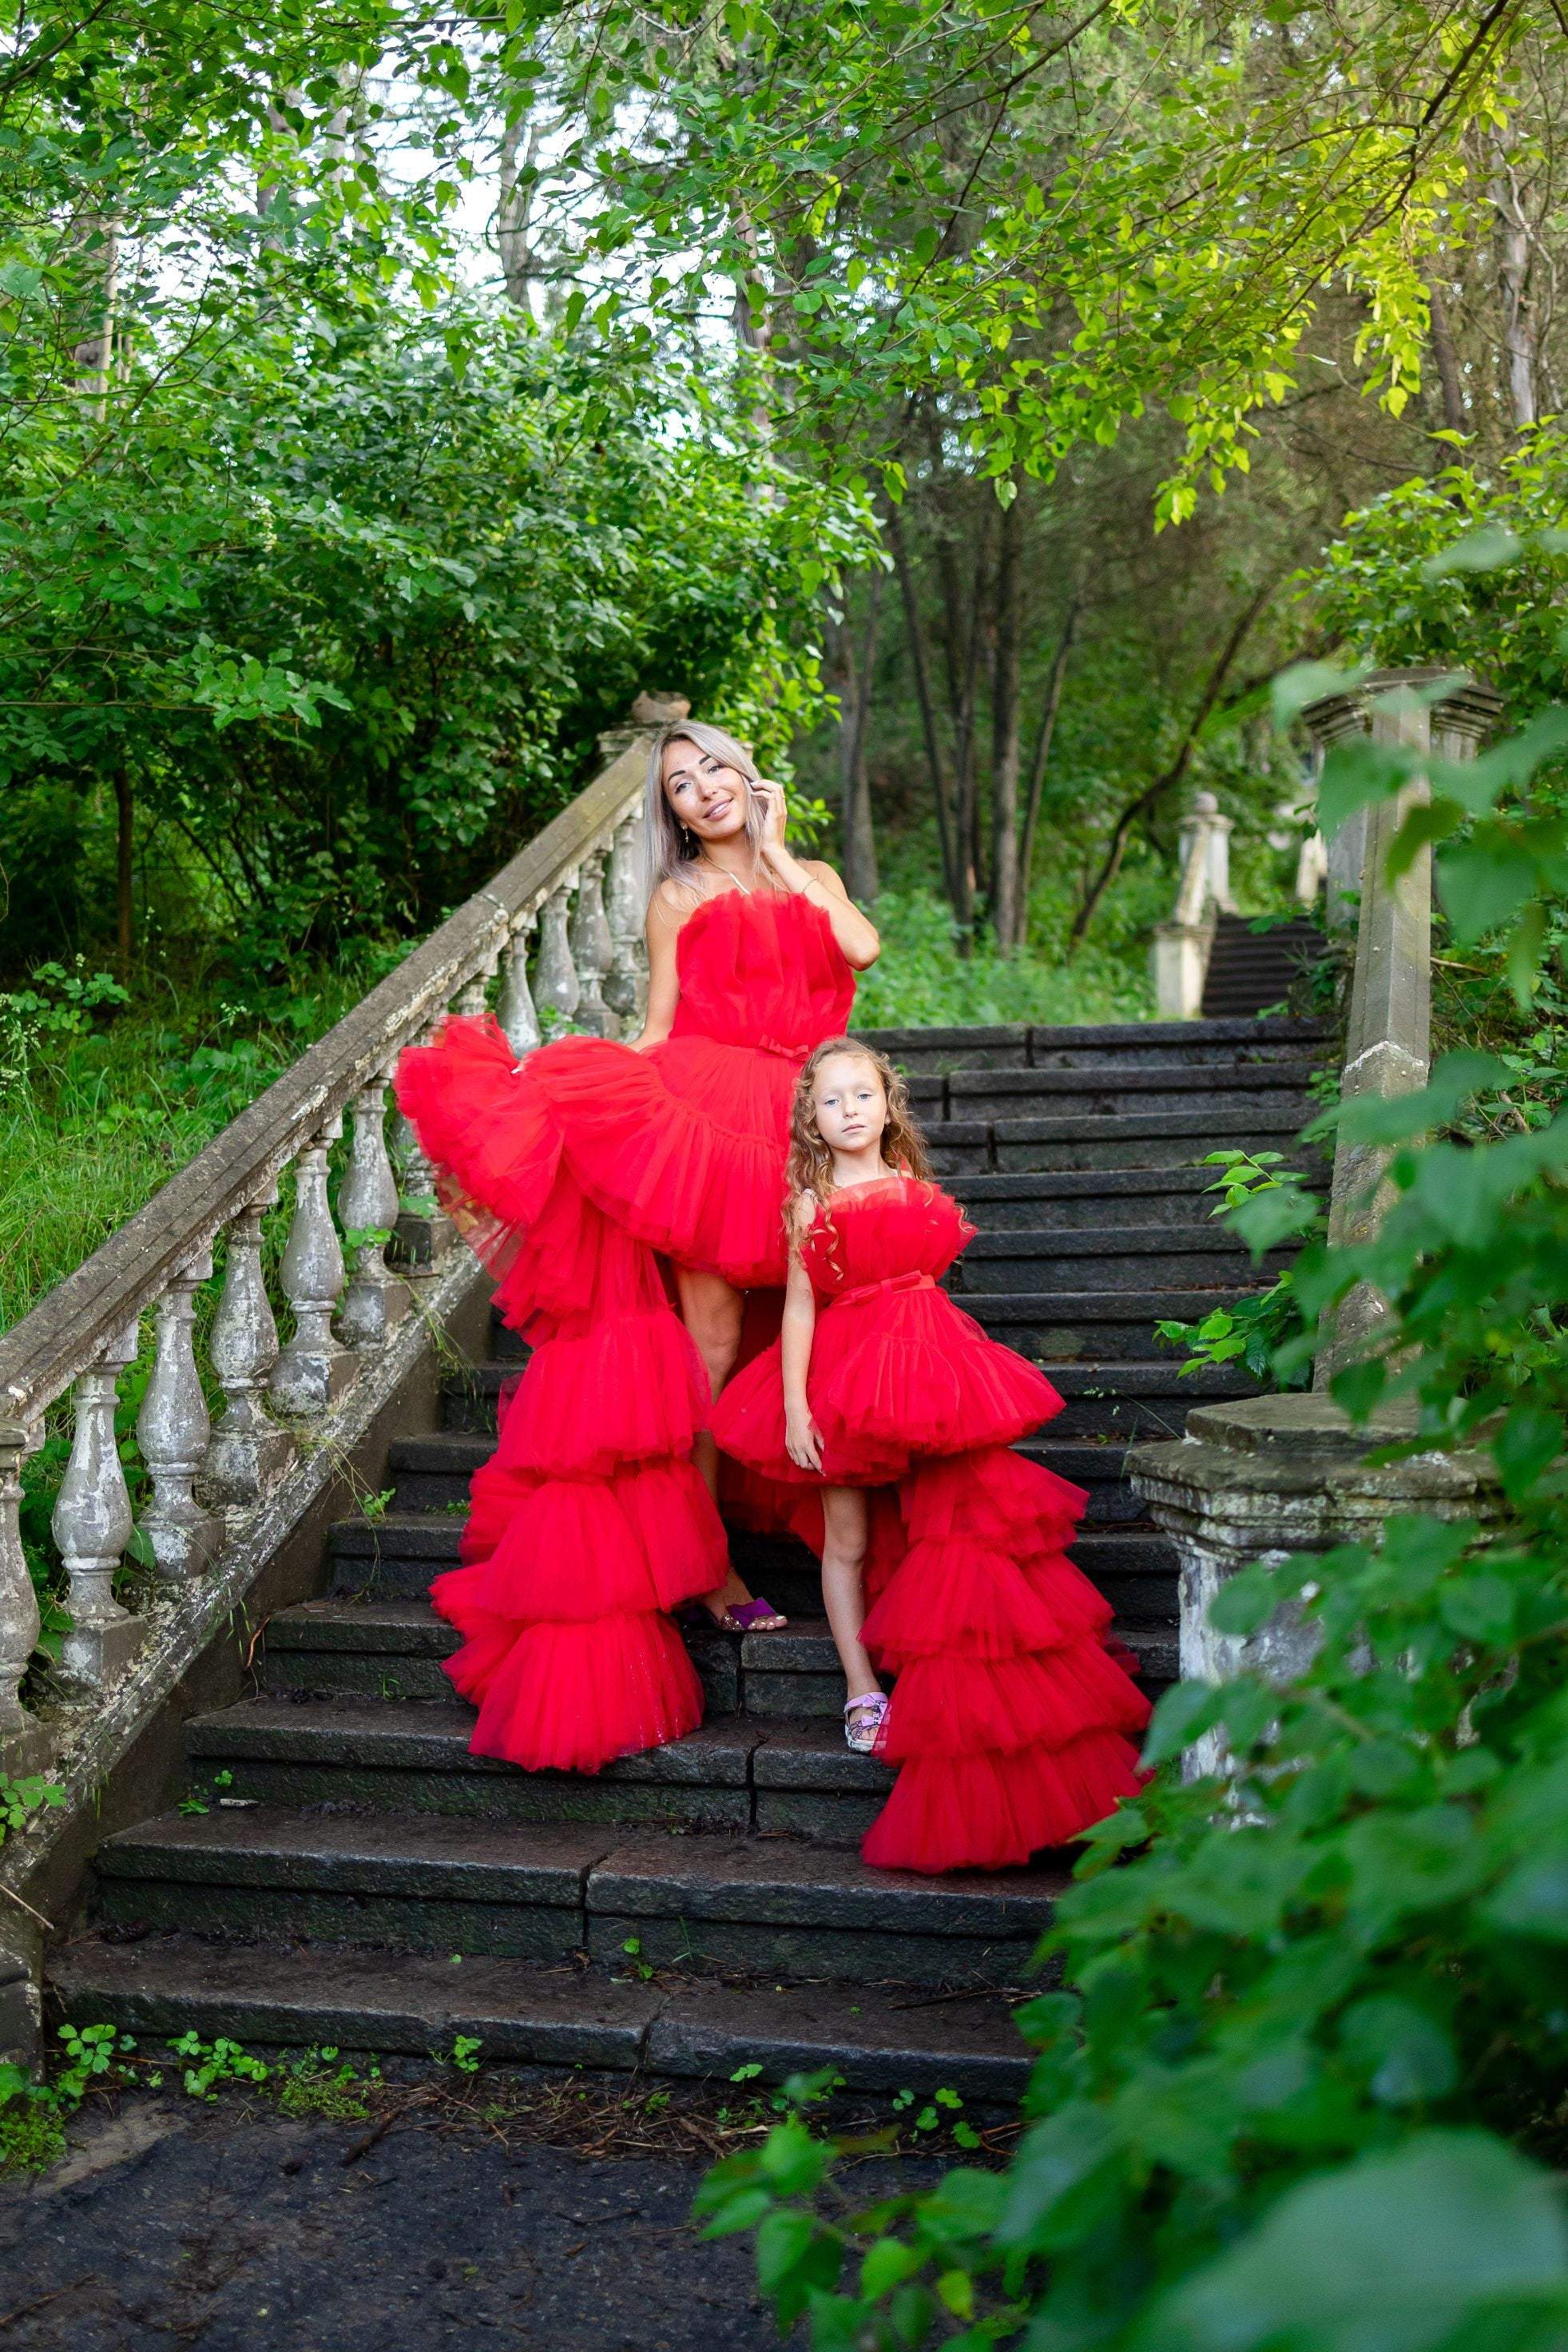 Matchinglook Red Tulle Dress, Designer Photoshoot Dress, Holiday Dress, Adult Tutu Dress, Special Occasion Dress, High Low Dress, Red Evening Dress 10 US / Ivory